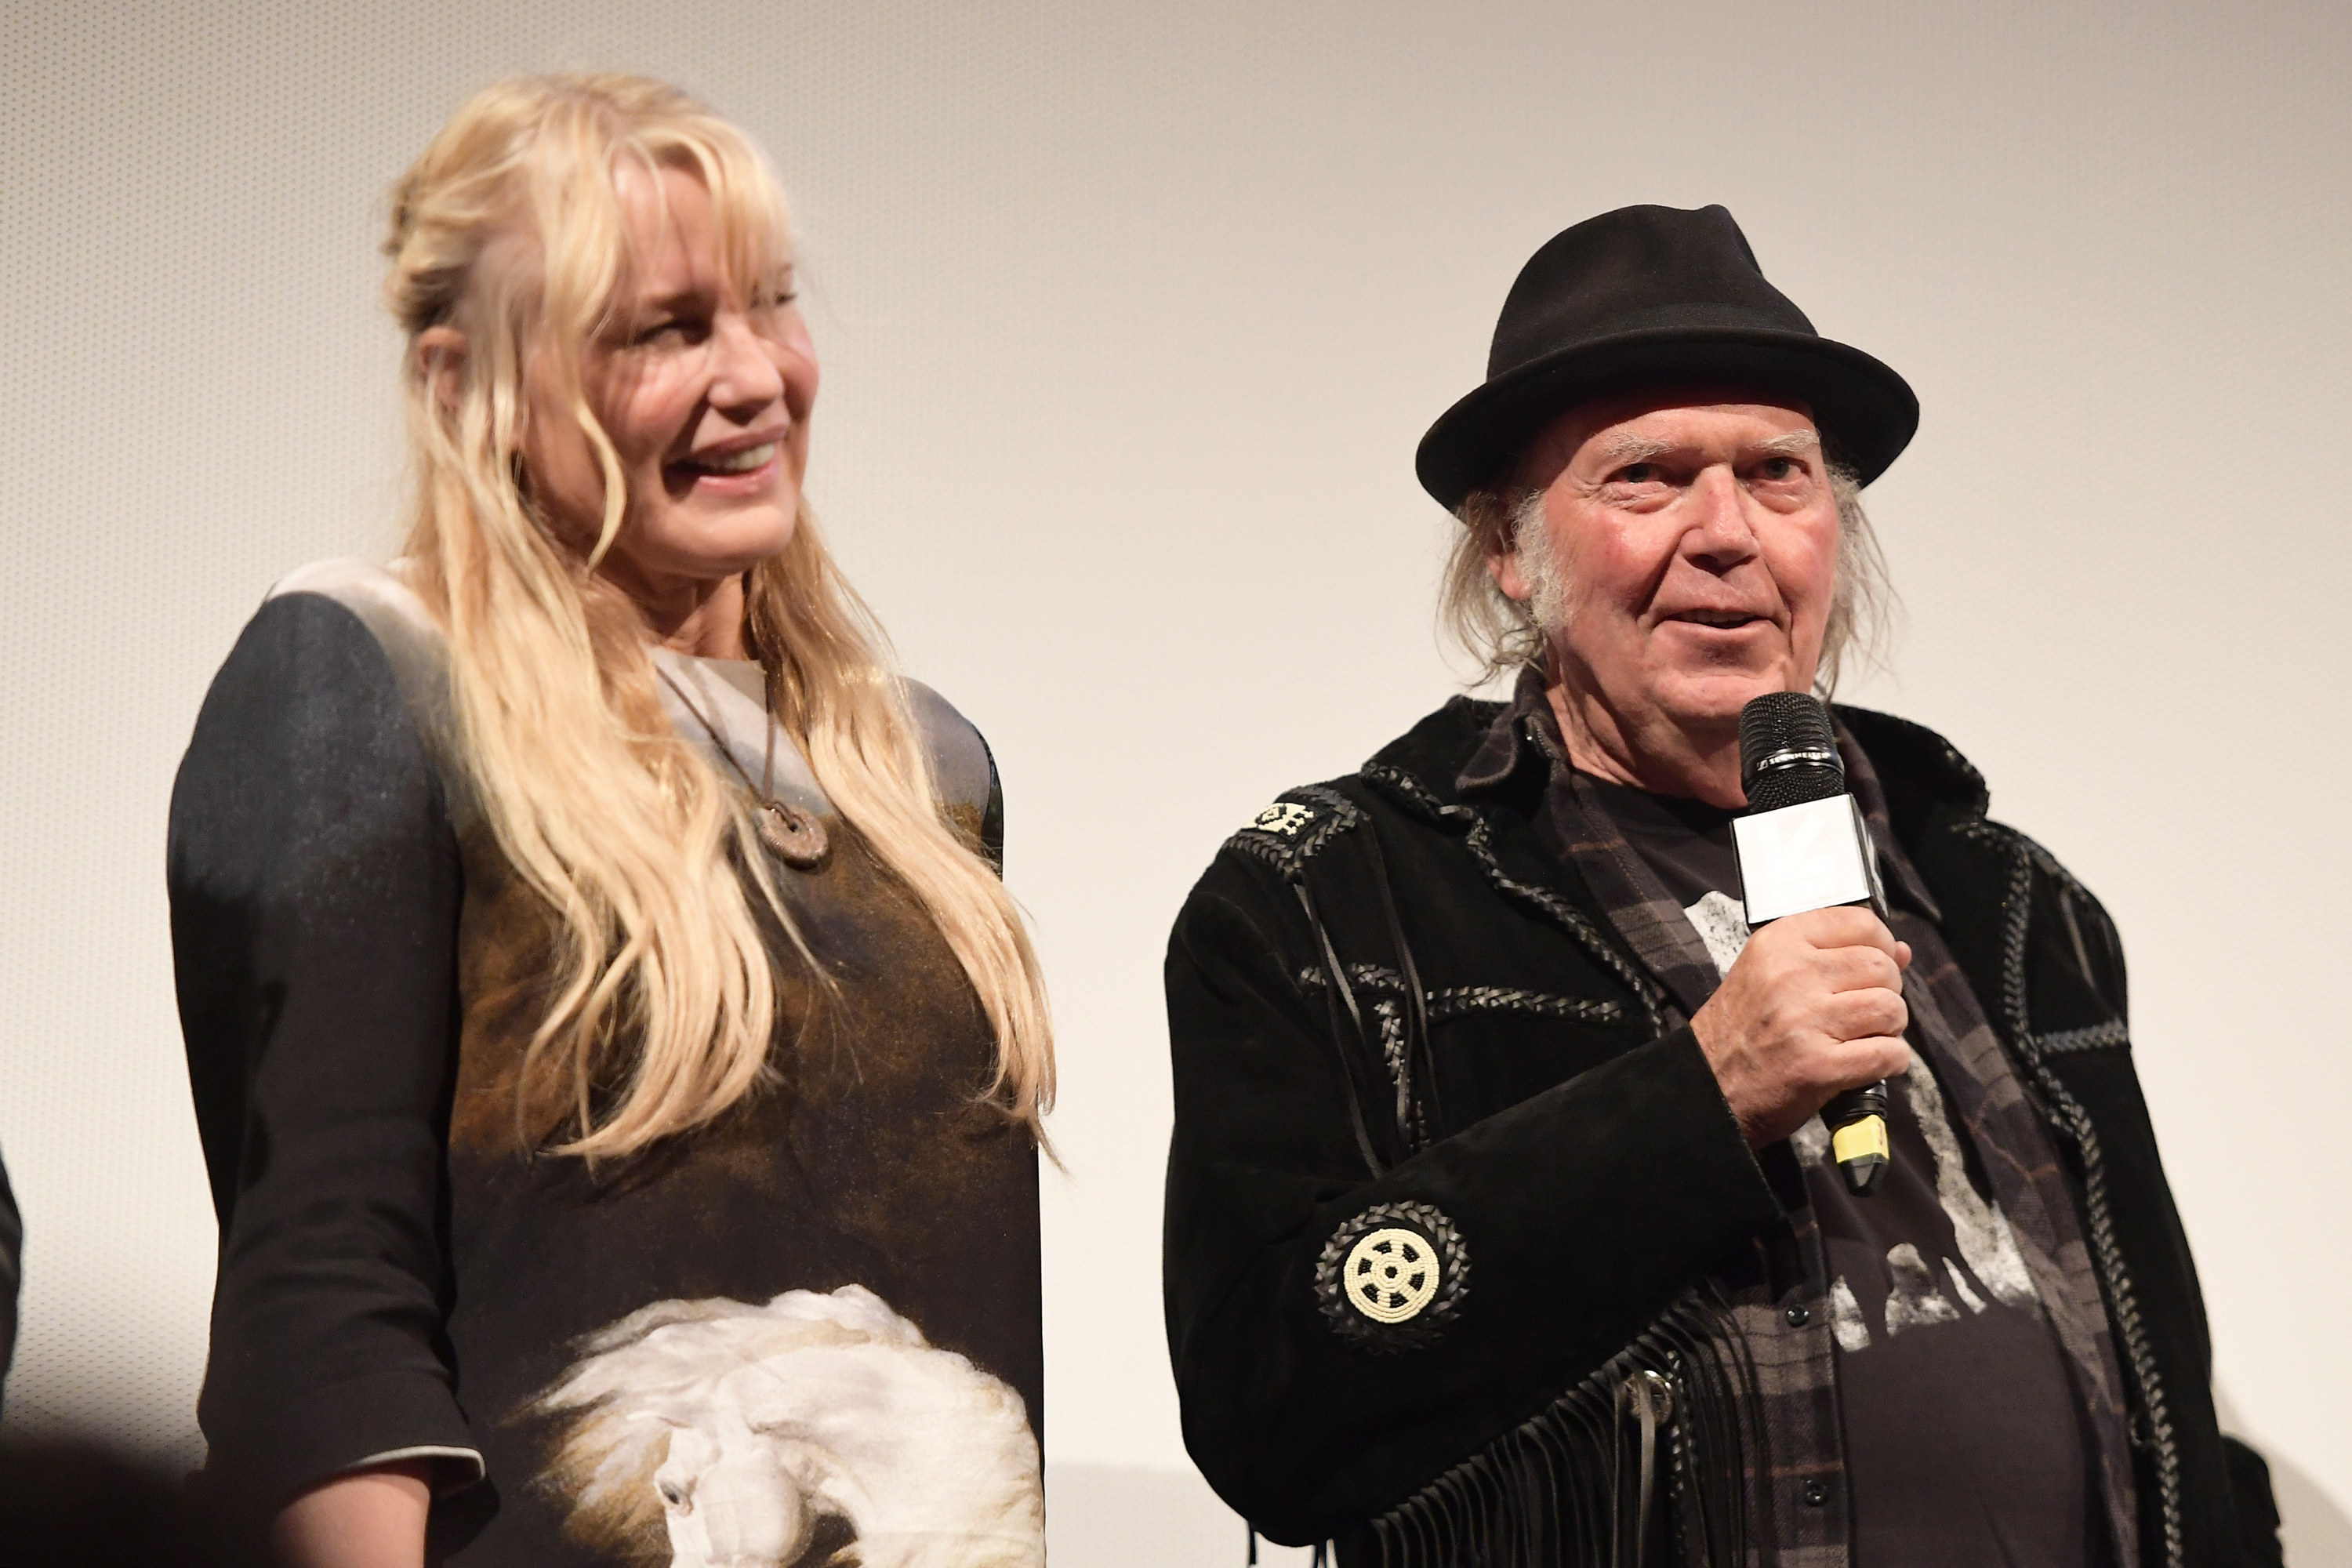 Daryl Hannah and Neil Young smiling together in 2018